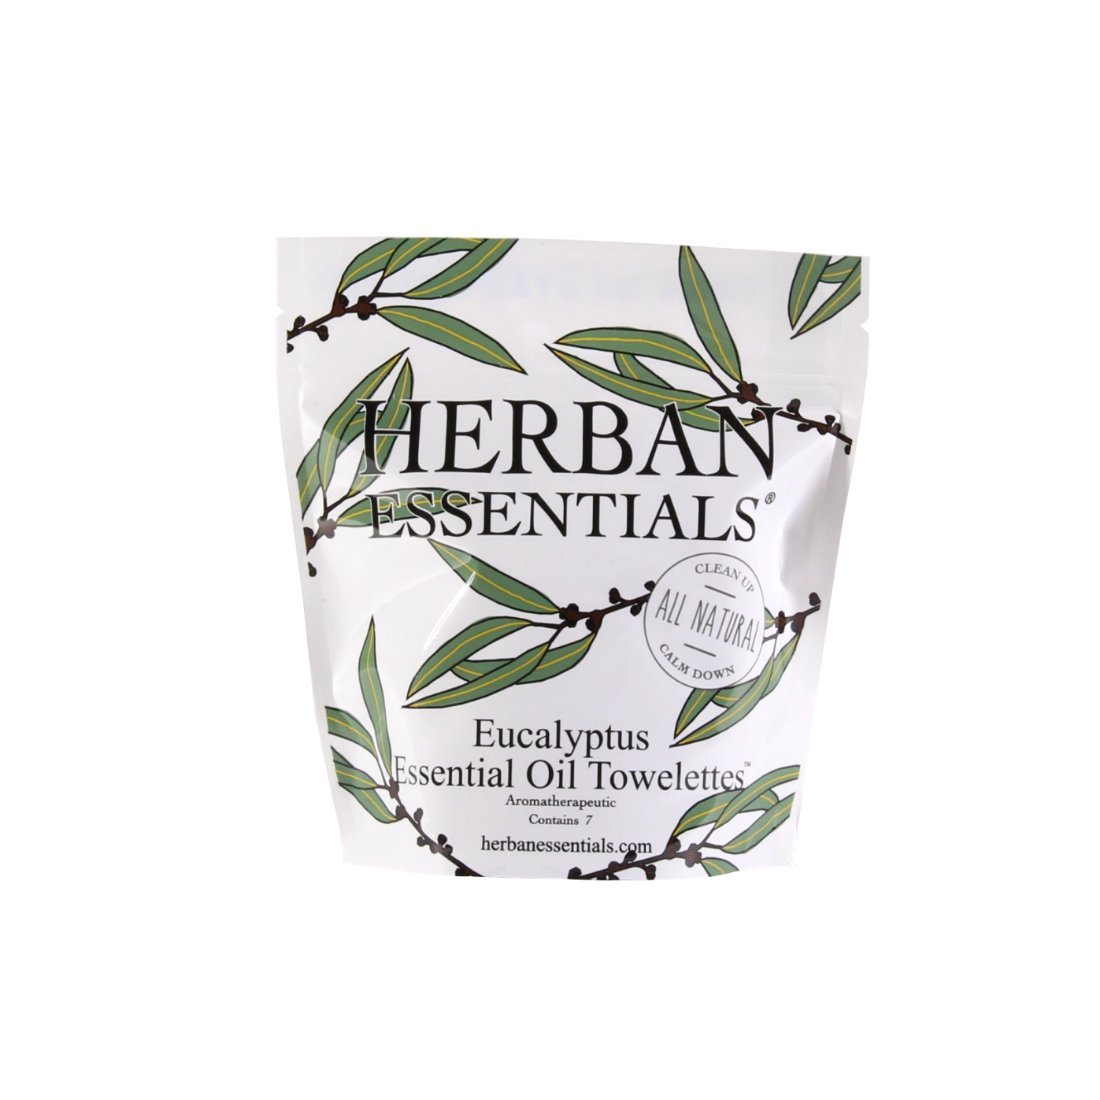 A package of Herban Essentials Essential Oil Towelettes - Eucalyptus Mini-Bags, featuring a botanical design and white background, marked as all-natural and aromatherapeutic.